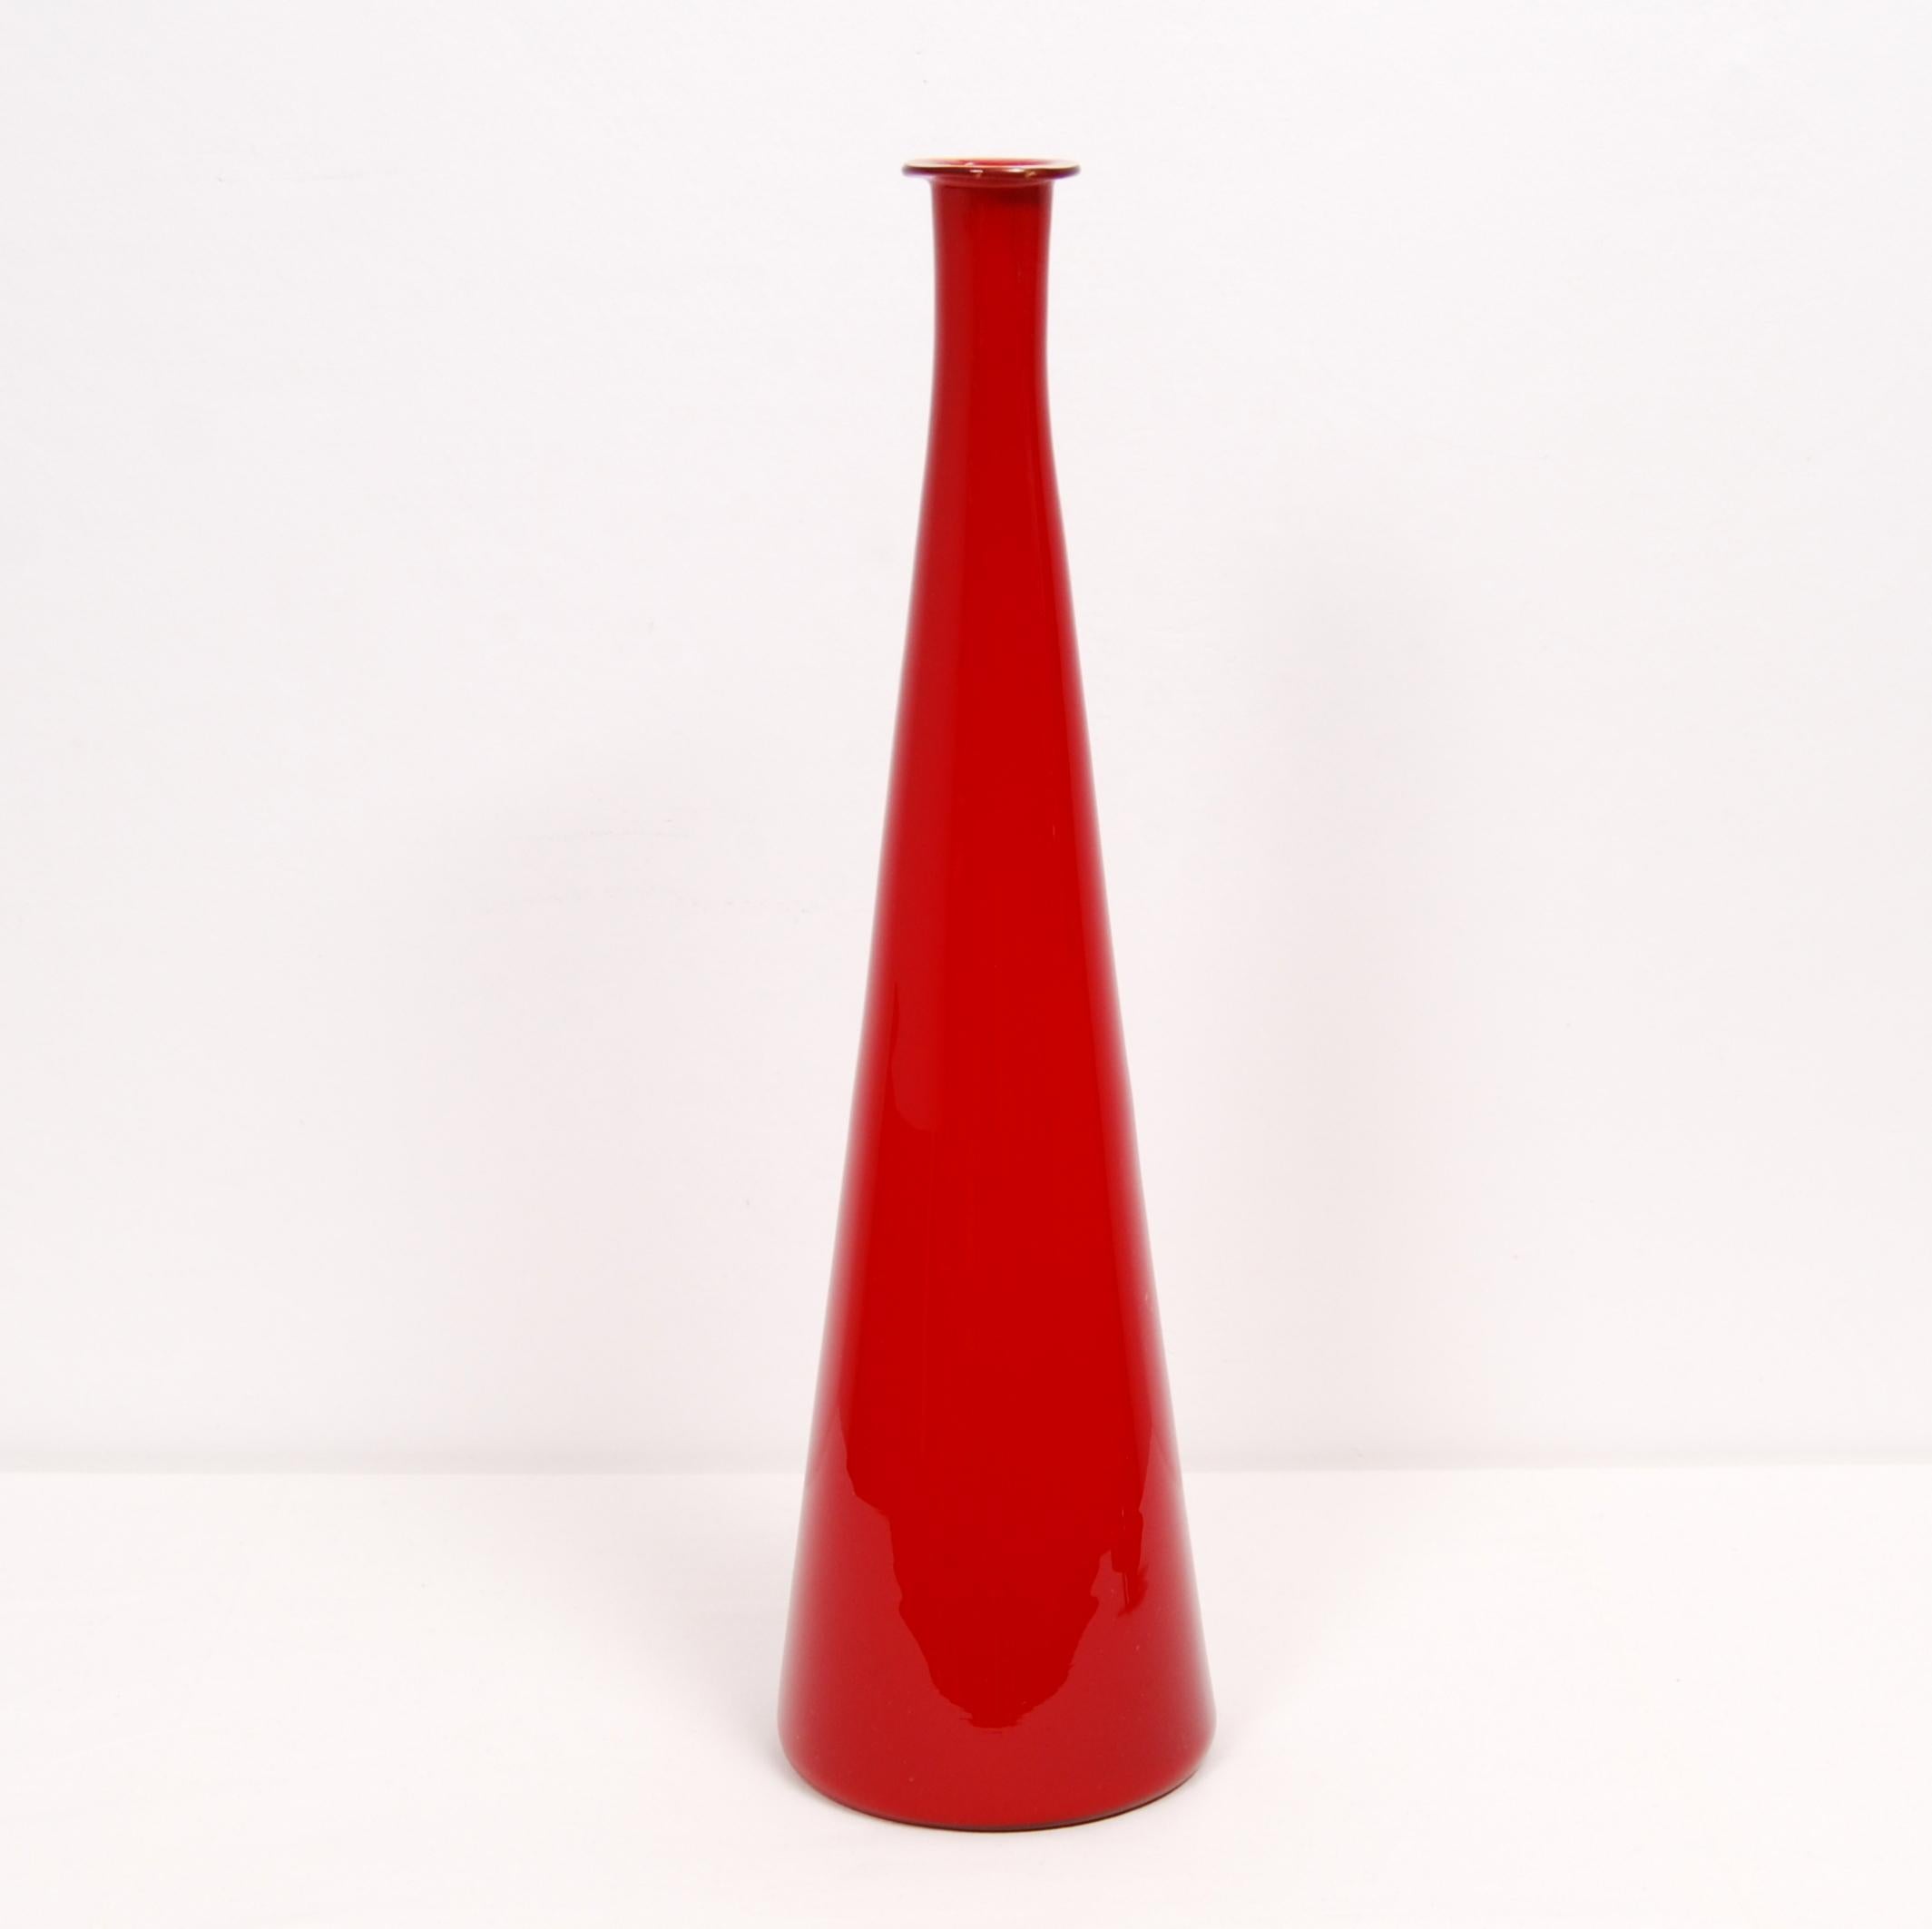 Italian art glass floor decanter in red with original stopper. Attributed to the Empoli company, and measures 66 cm tall. Great decorative piece.
 